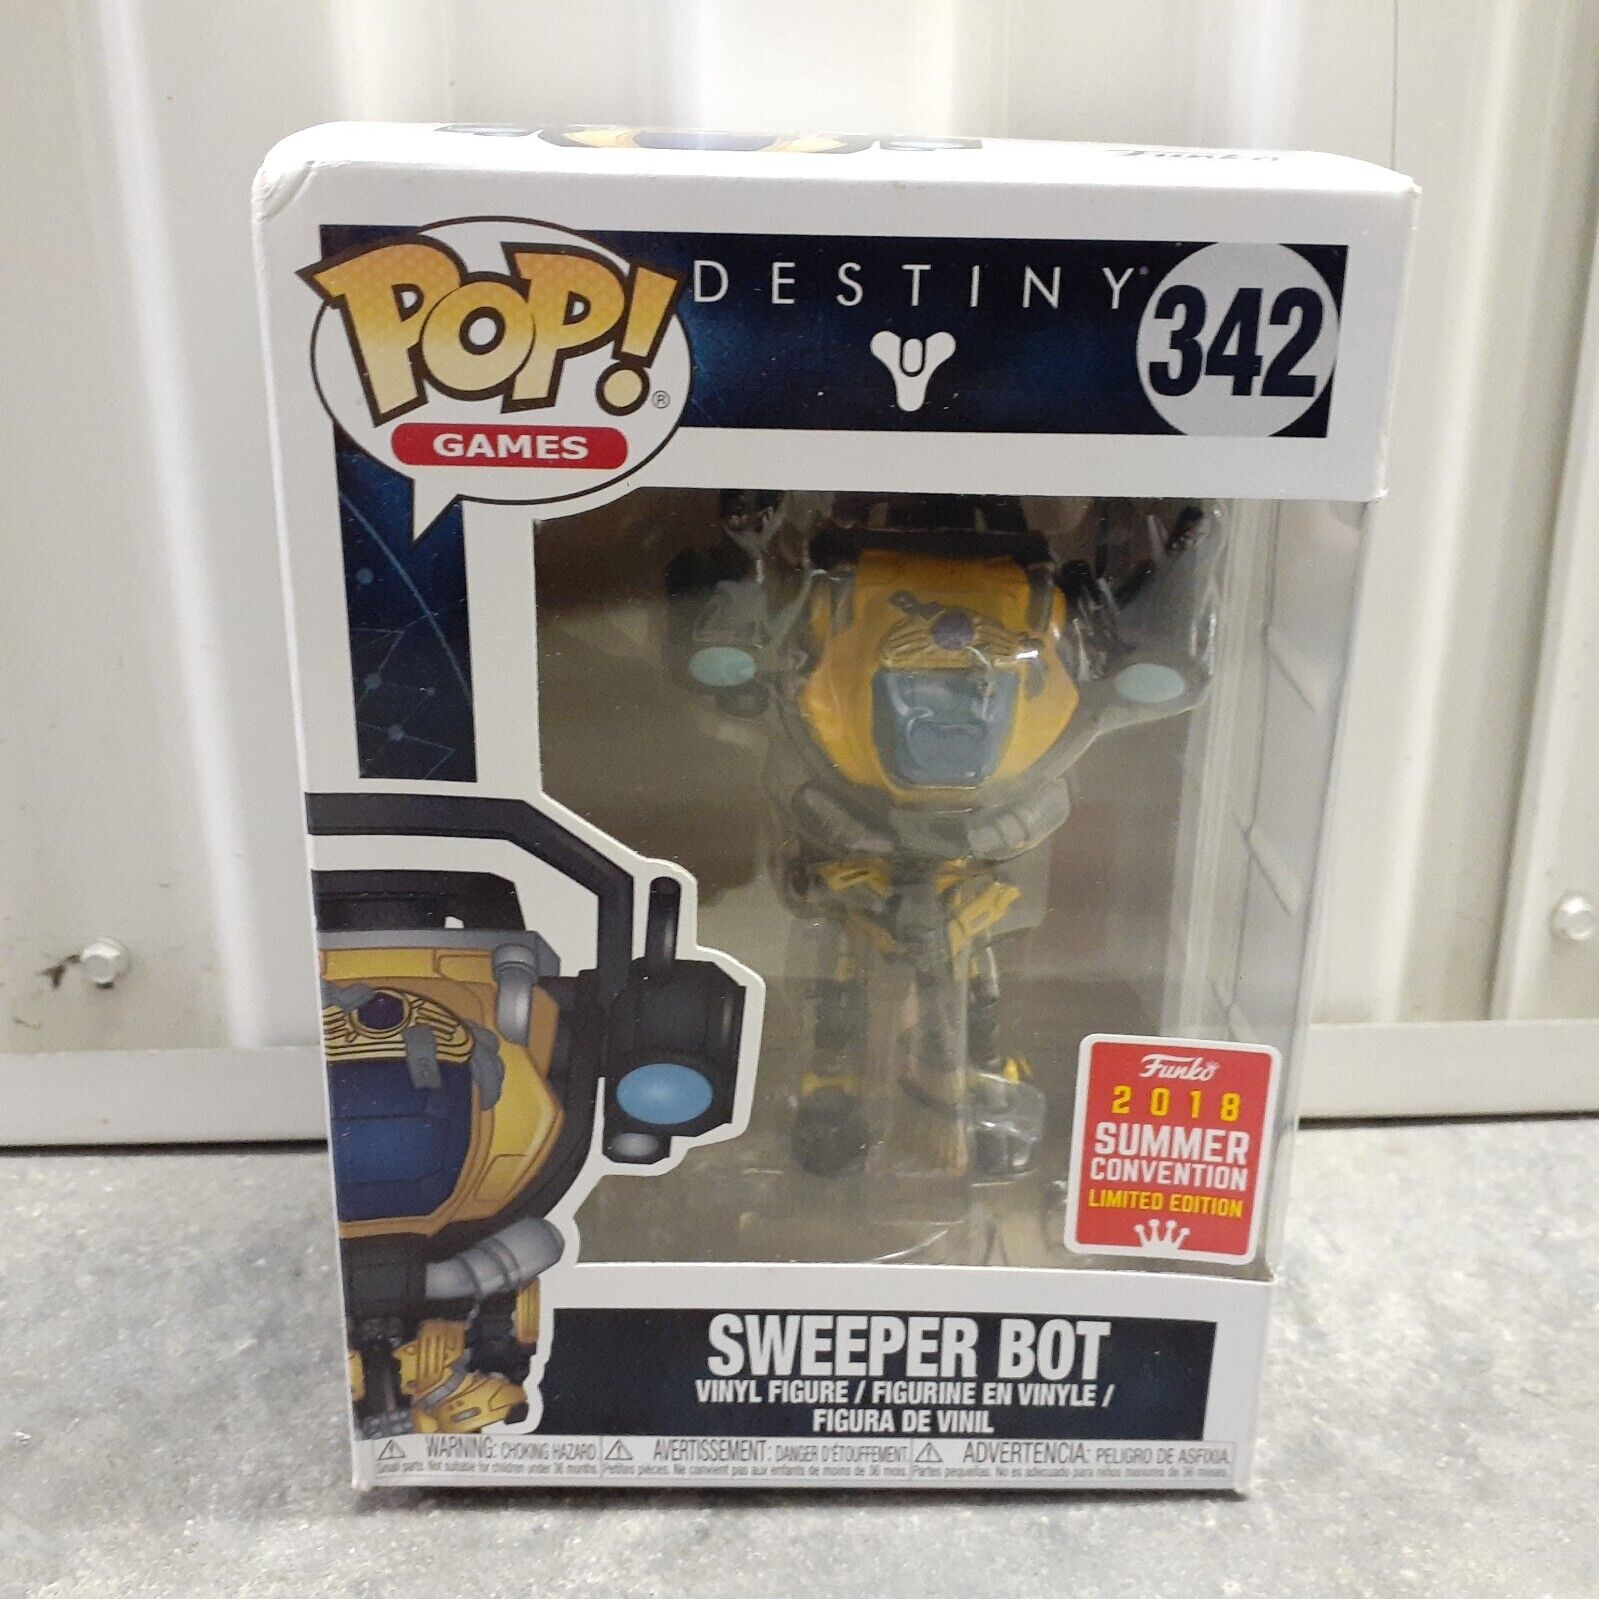 Funko Pop Games #342 - Destiny Sweeper Bot (2018 Summer Convention Exclusive)